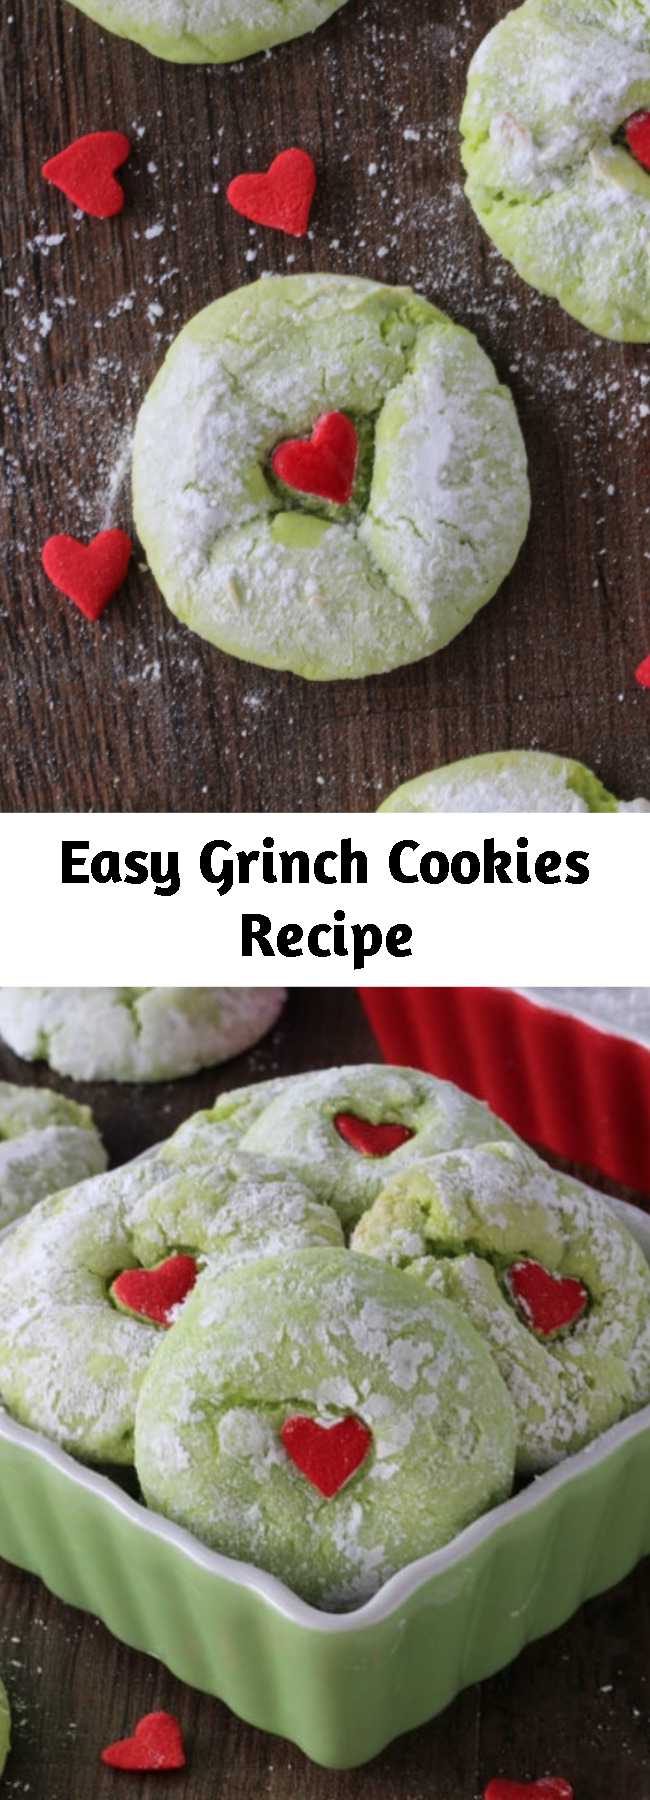 Easy Grinch Cookies Recipe - Made and loved by thousands every year! These Cake Mix Grinch Cookies are so easy and festive they will be sure to put you in the holiday mood.